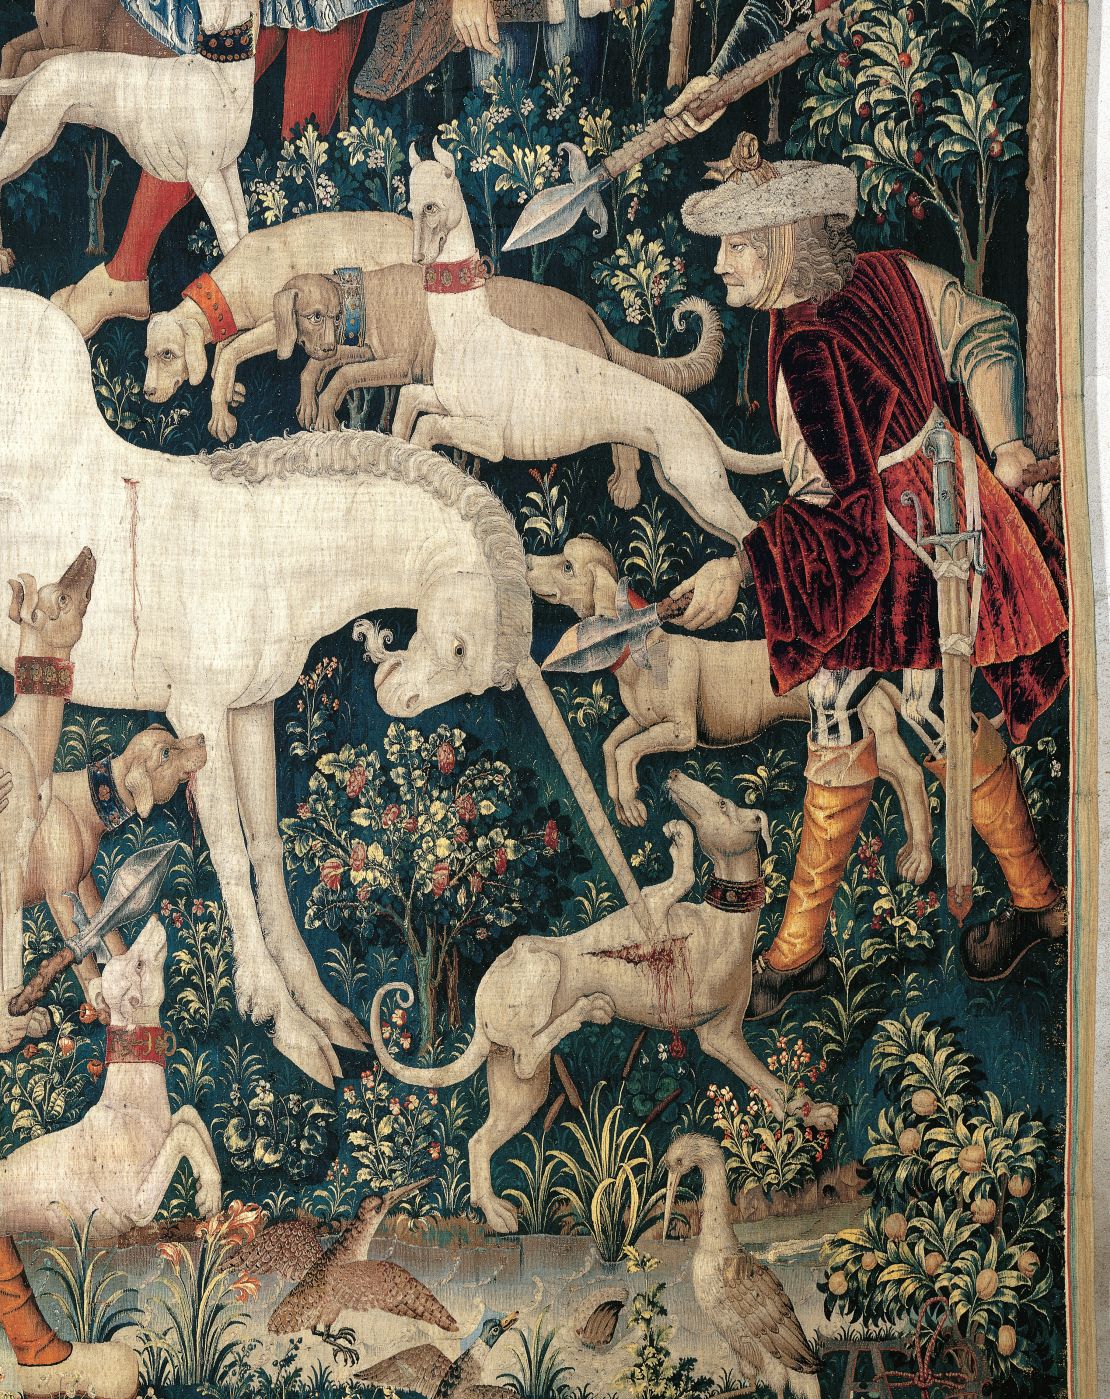 "The Unicorn Defends Itself," a tapestry dating from 1495-1505 in the collection of the Metropolitan Museum of Art. 